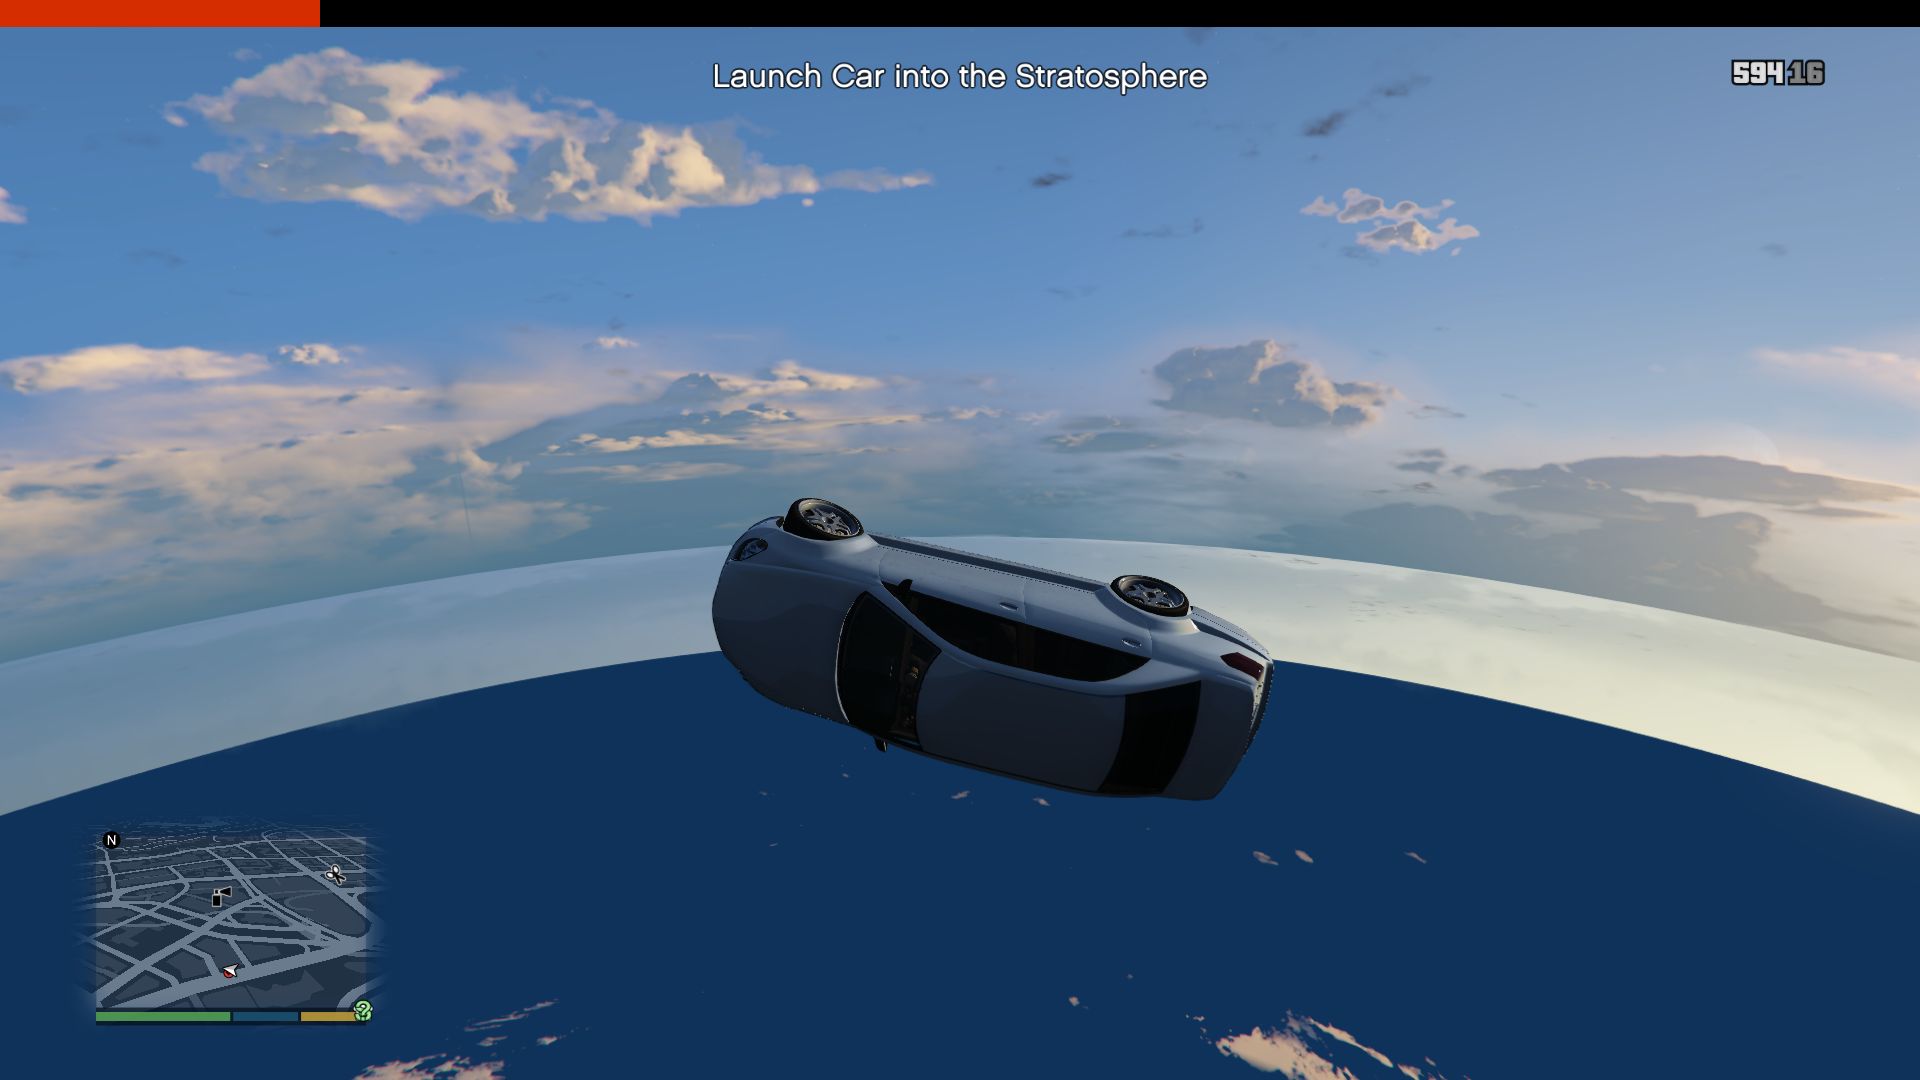 Launch Car into the Stratosphere